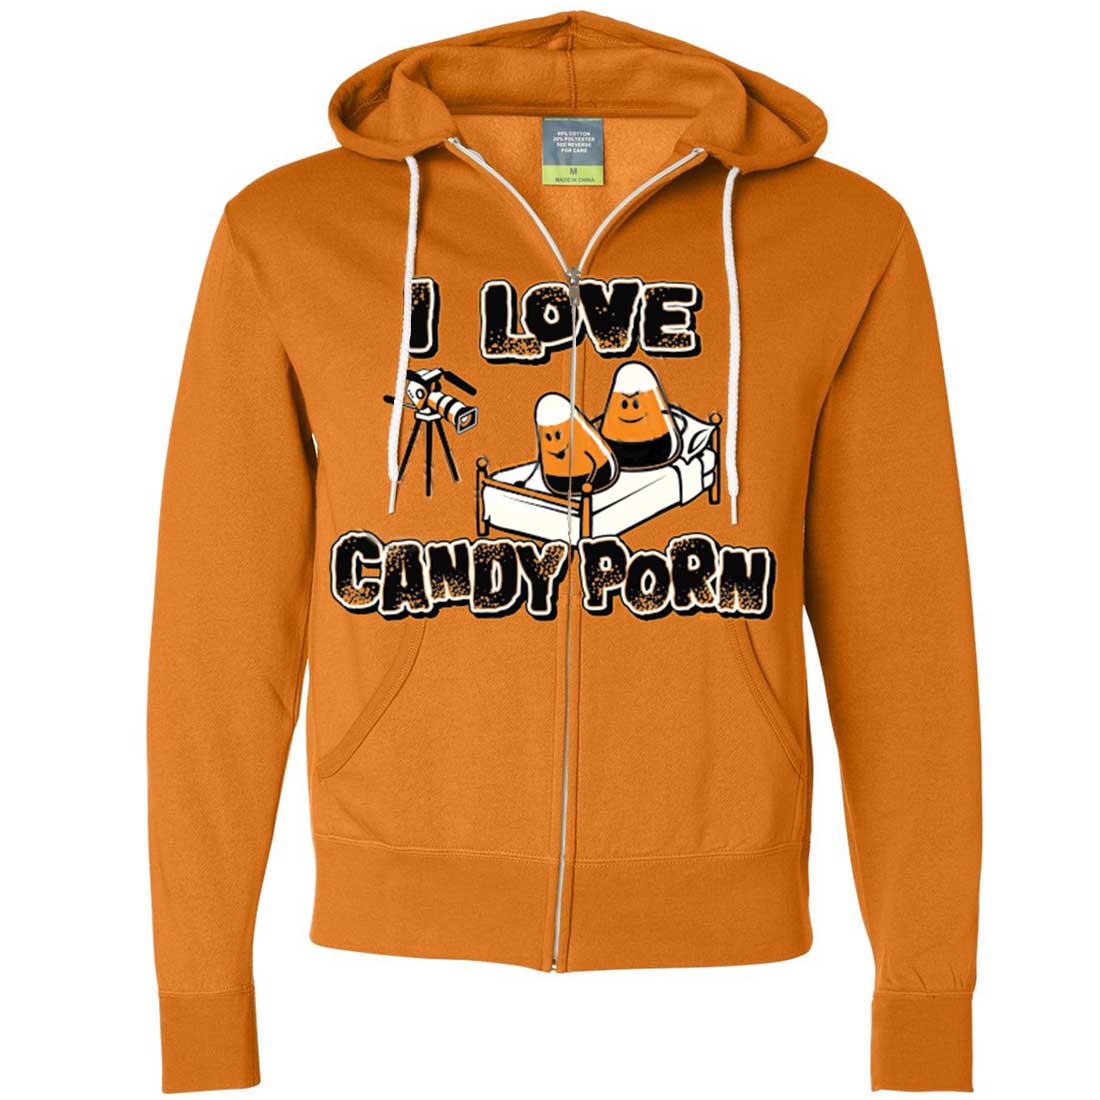 I Love Candy Porn Zip-Up Hoodie - California Republic Clothes